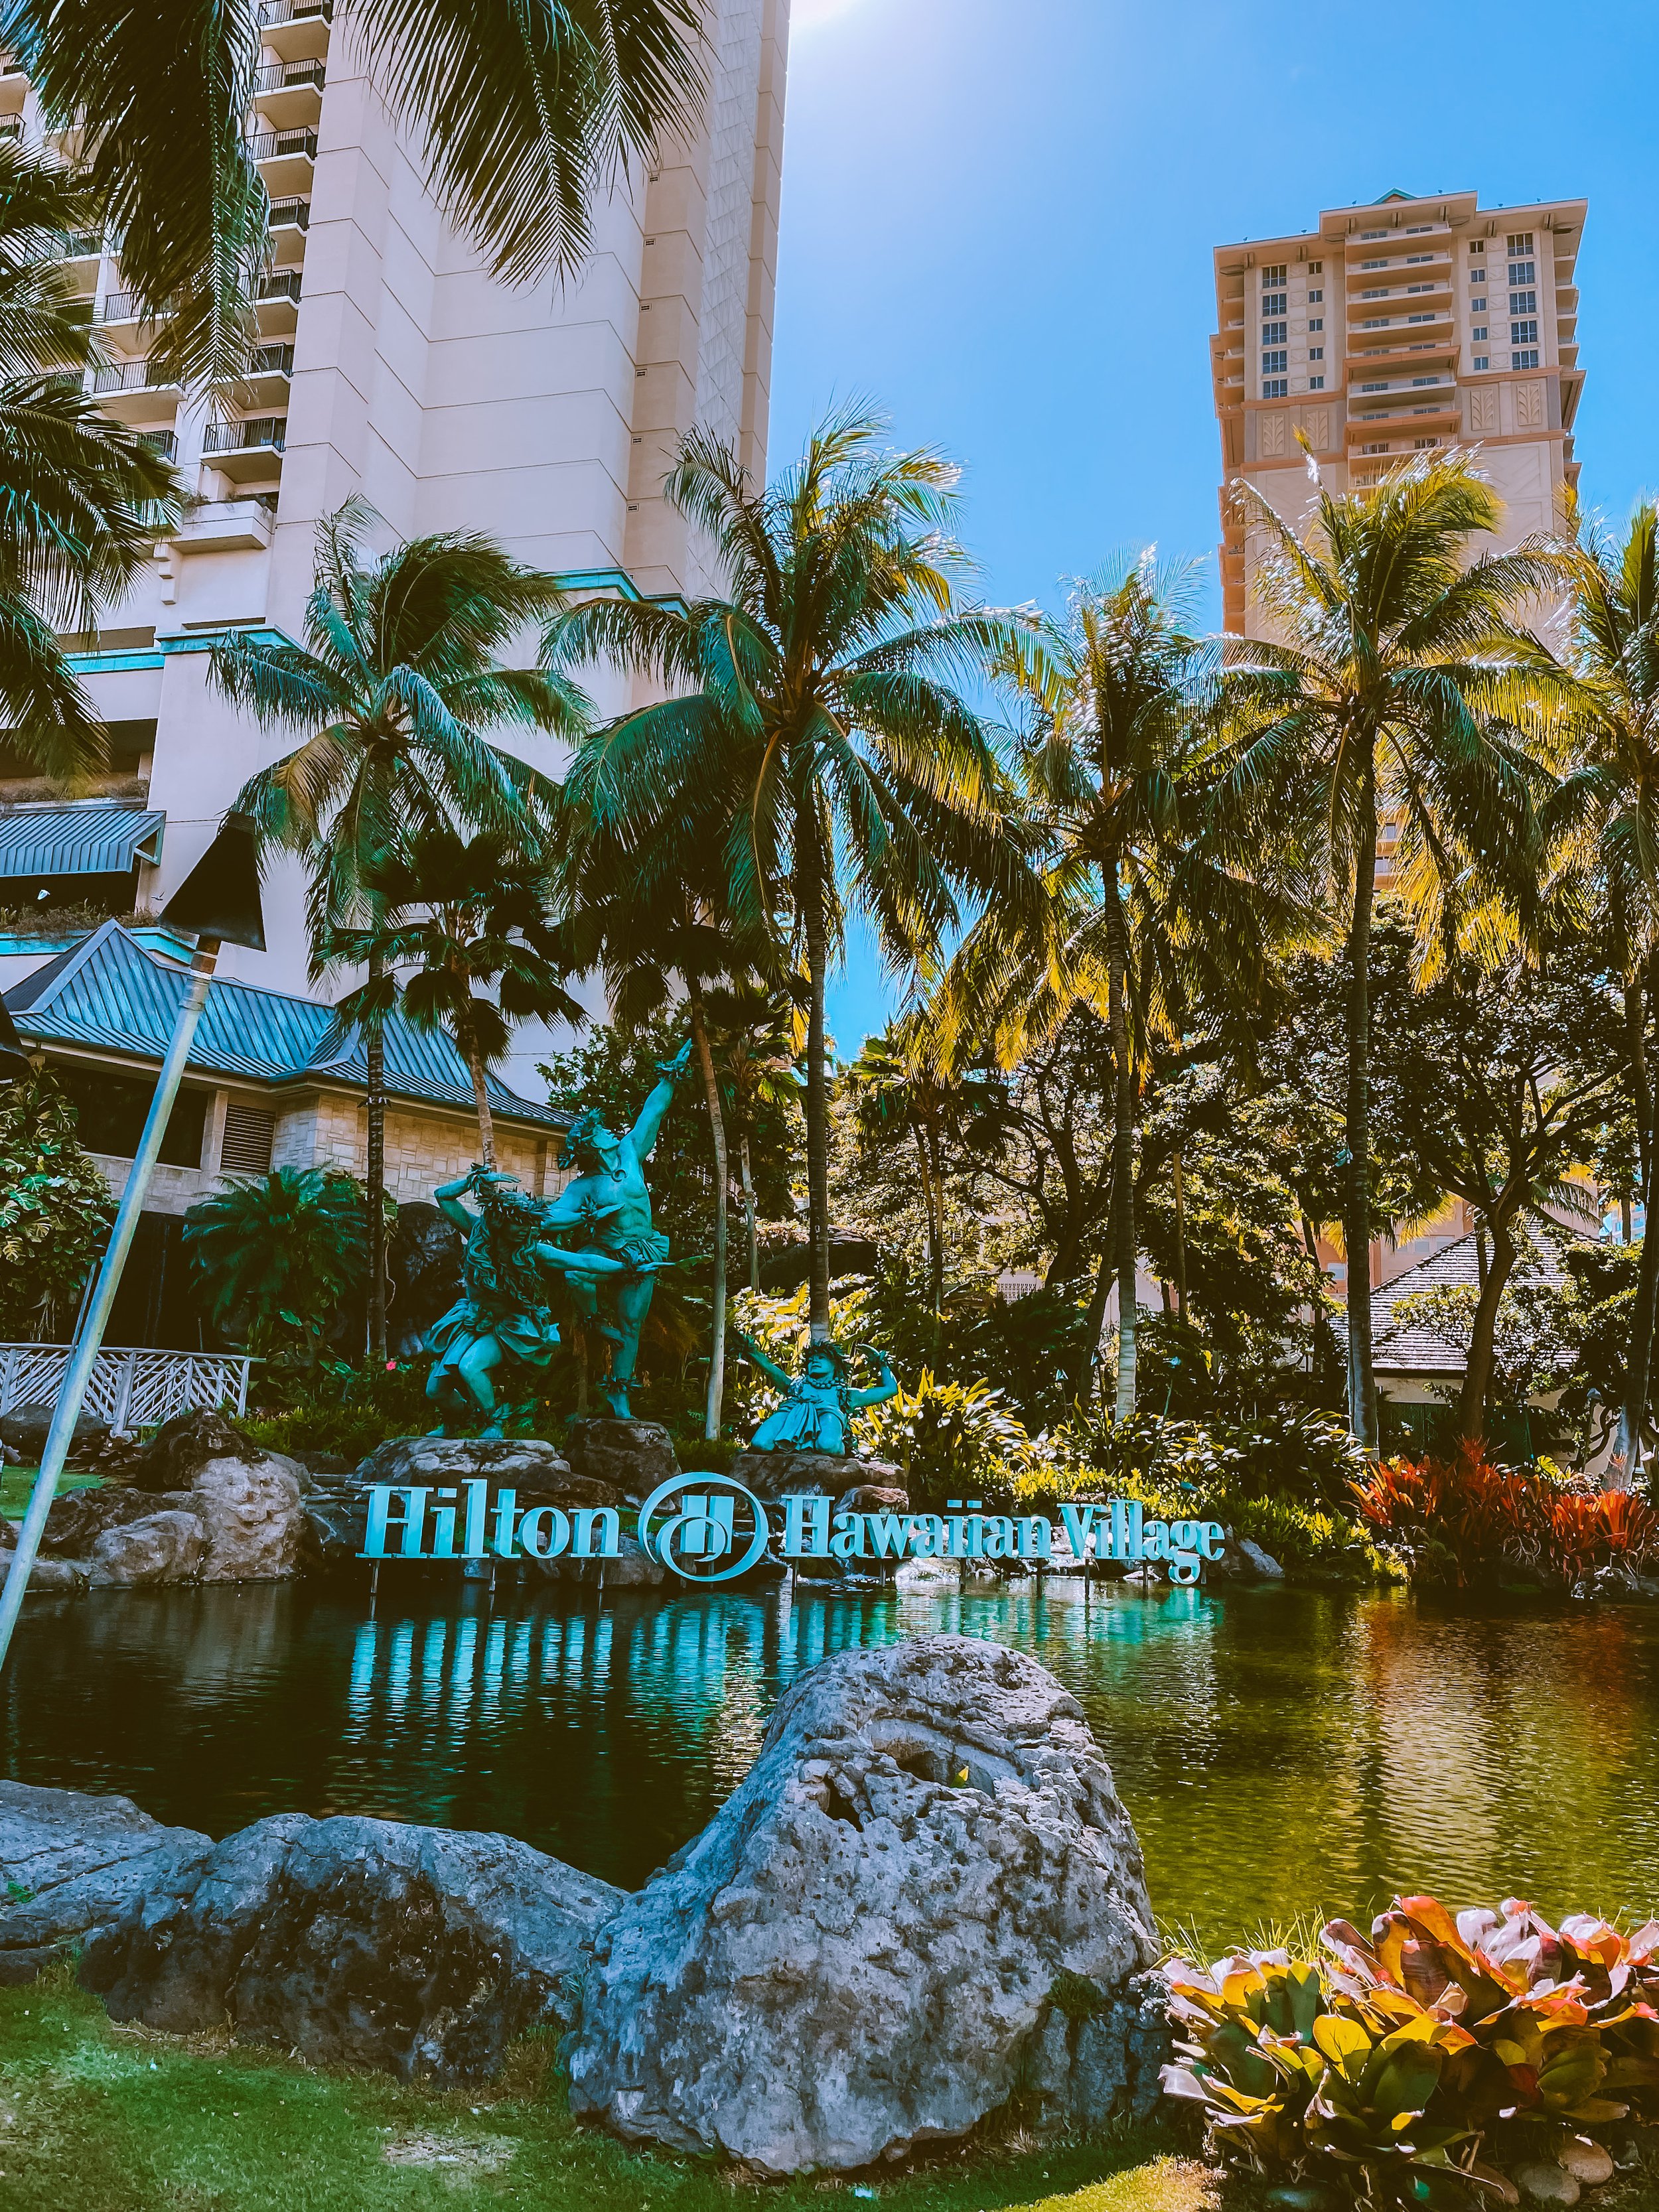 Hilton Hawaiian Village Shops is one of the best places to shop in Honolulu